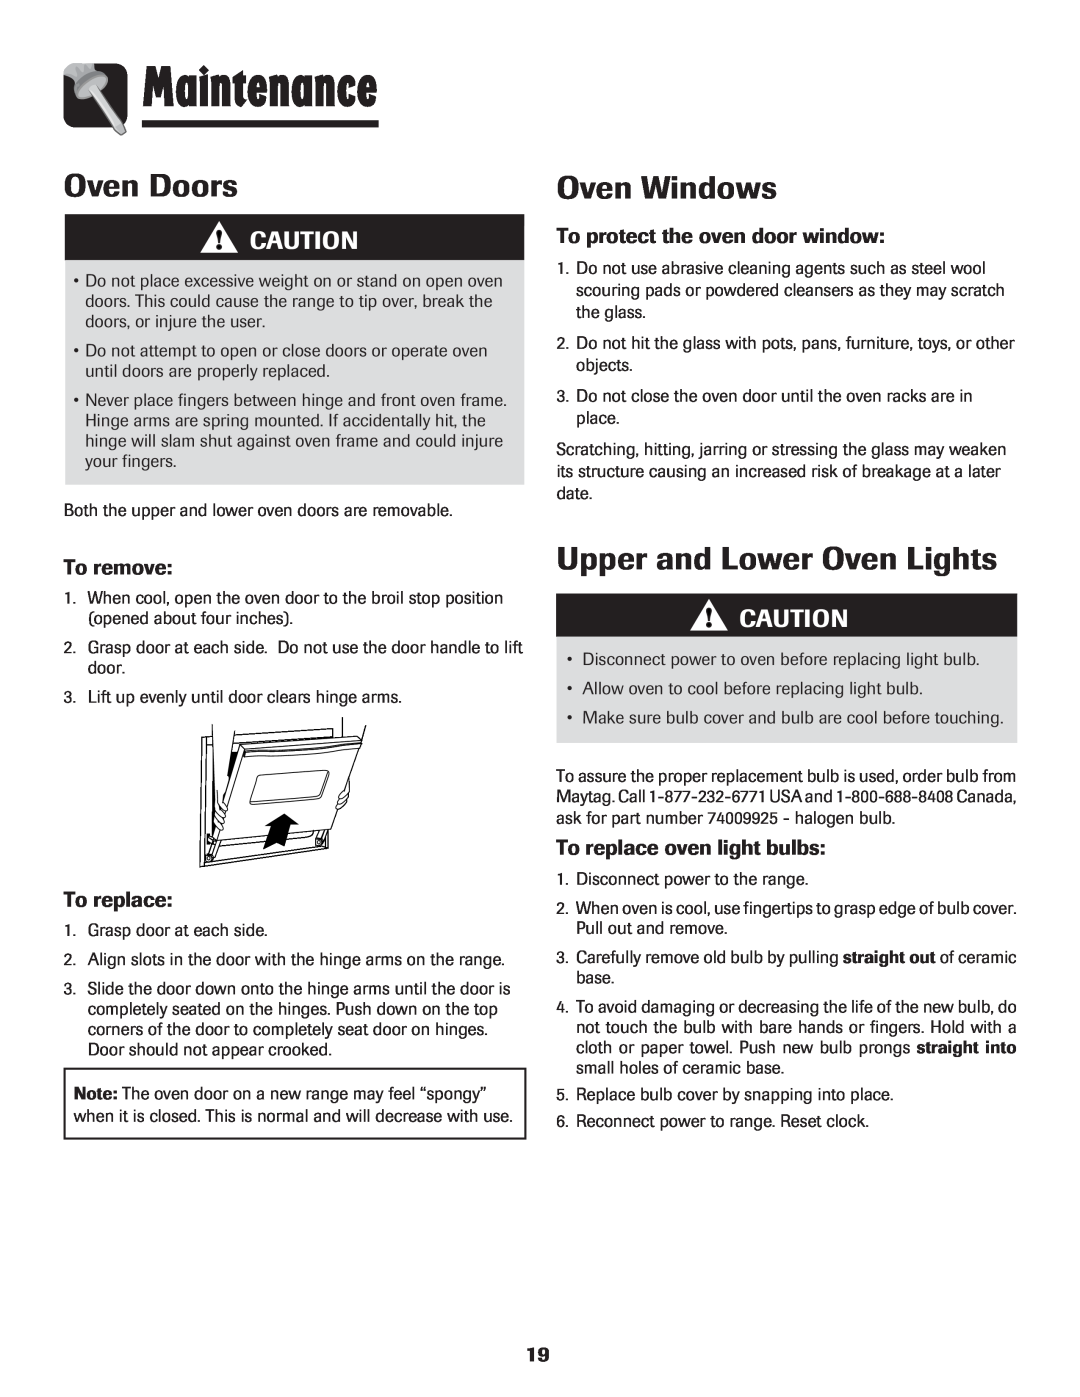 Maytag MGR6751BDW Maintenance, Oven Doors, Oven Windows, Upper and Lower Oven Lights, To protect the oven door window 